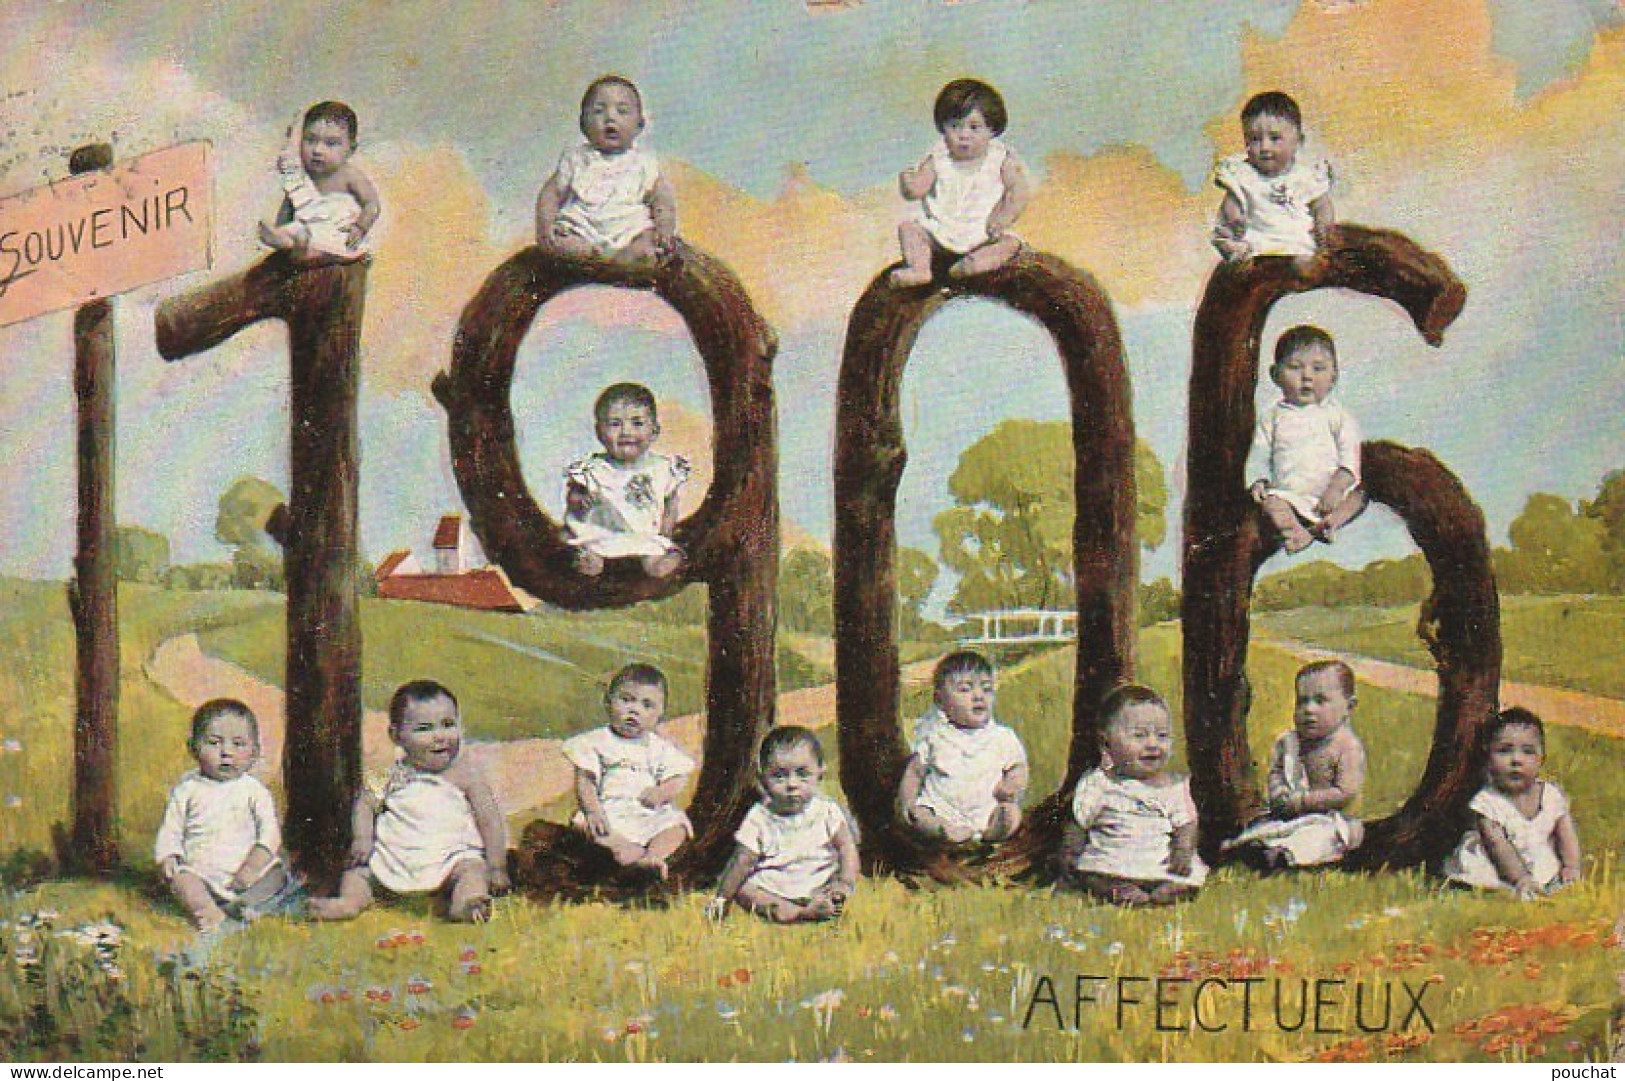 HO Nw (2) ANNEE 1906 - GROUPE DE BEBES , DECOR CHAMPETRE - 2 SCANS - Children And Family Groups